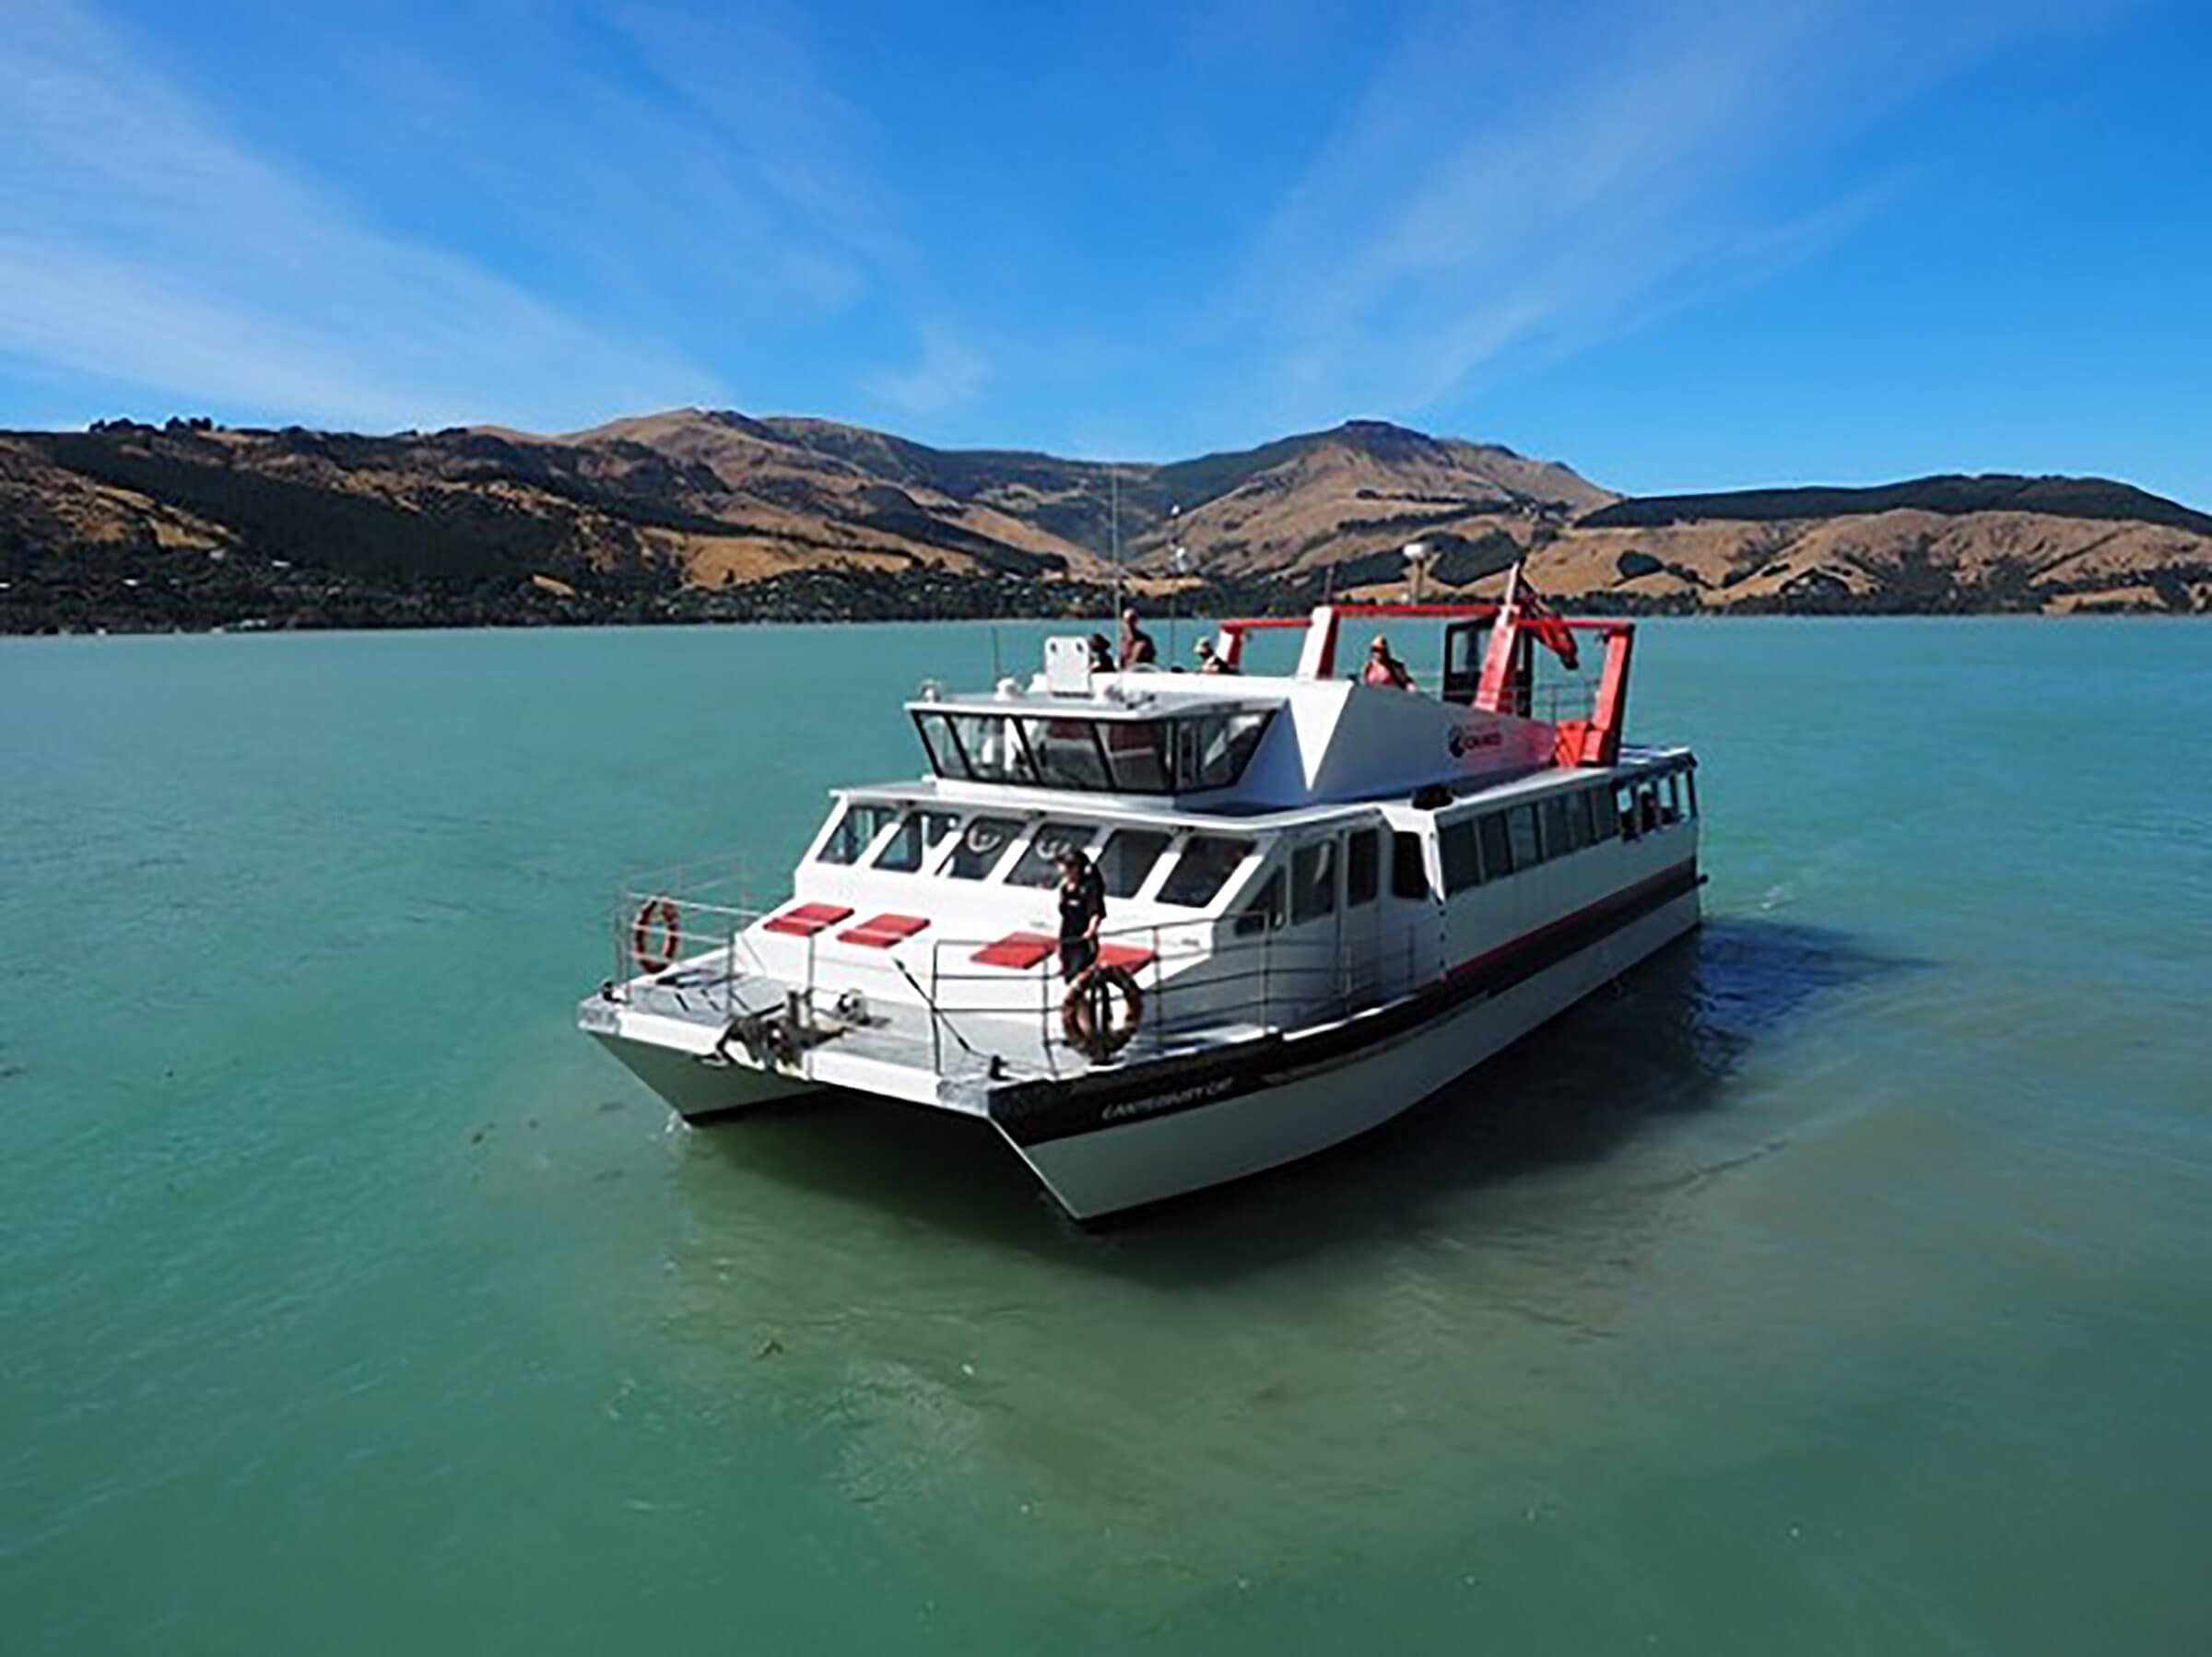 Black Cat Akaroa catamaran out on the harbor, blue water and rolling hills in the background